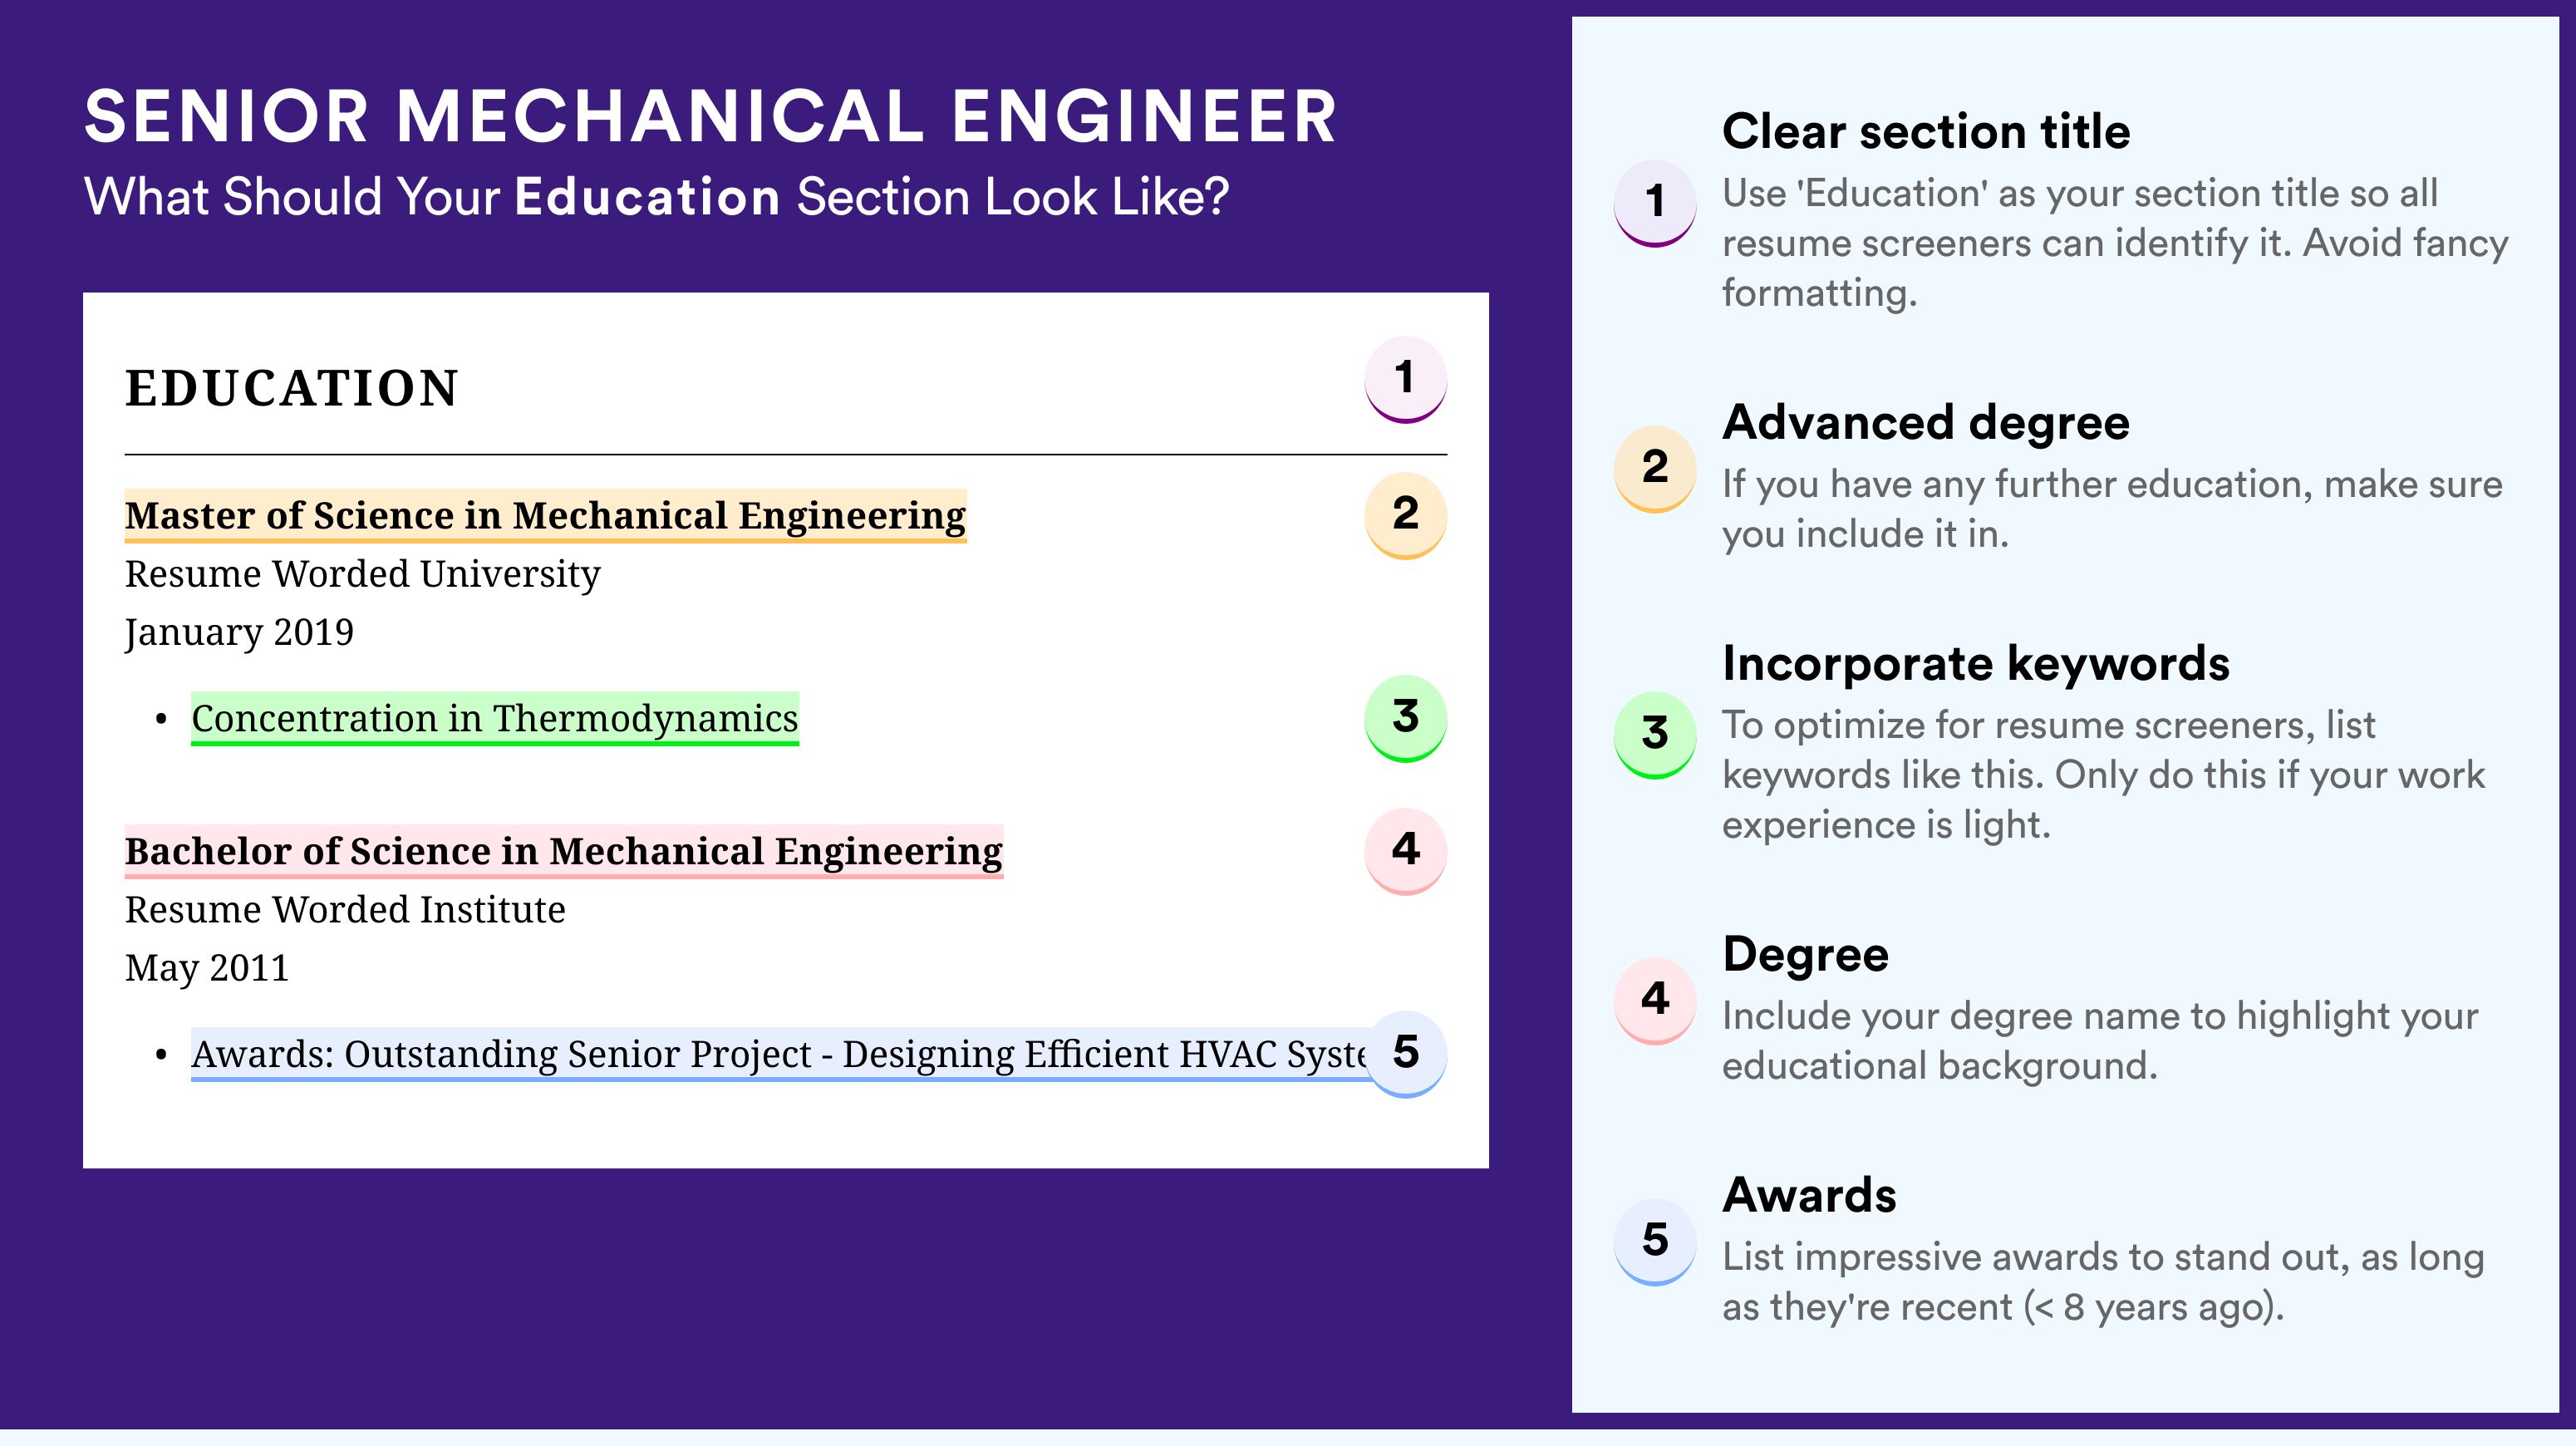 How To Write An Education Section - Senior Mechanical Engineer Roles